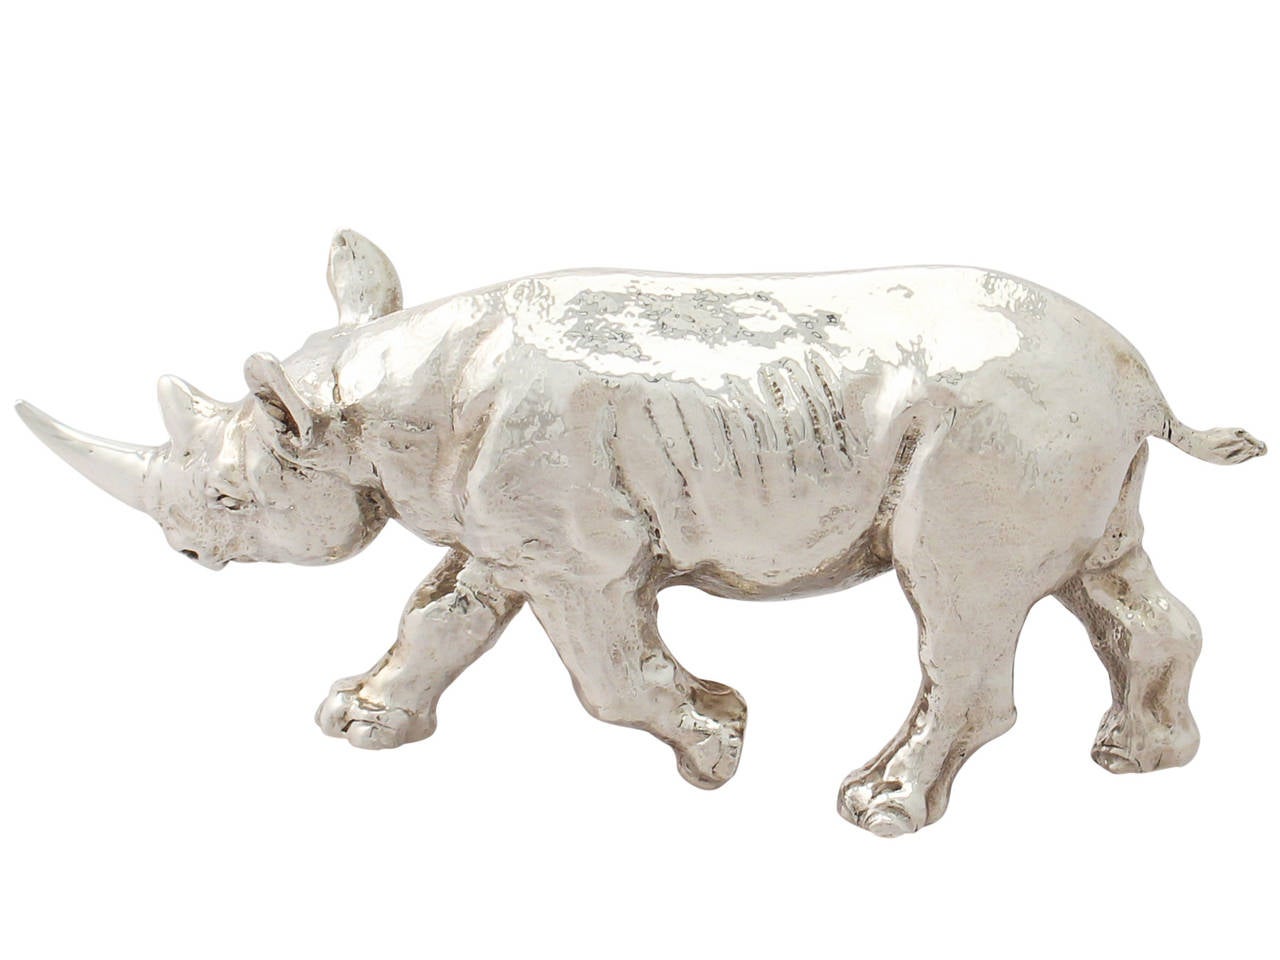 A fine contemporary cast English sterling silver model of a Rhinoceros; part of our animal silverware collection.

This fine contemporary cast sterling silver ornament has been realistically modelled in the form of a rhinoceros.

This silver